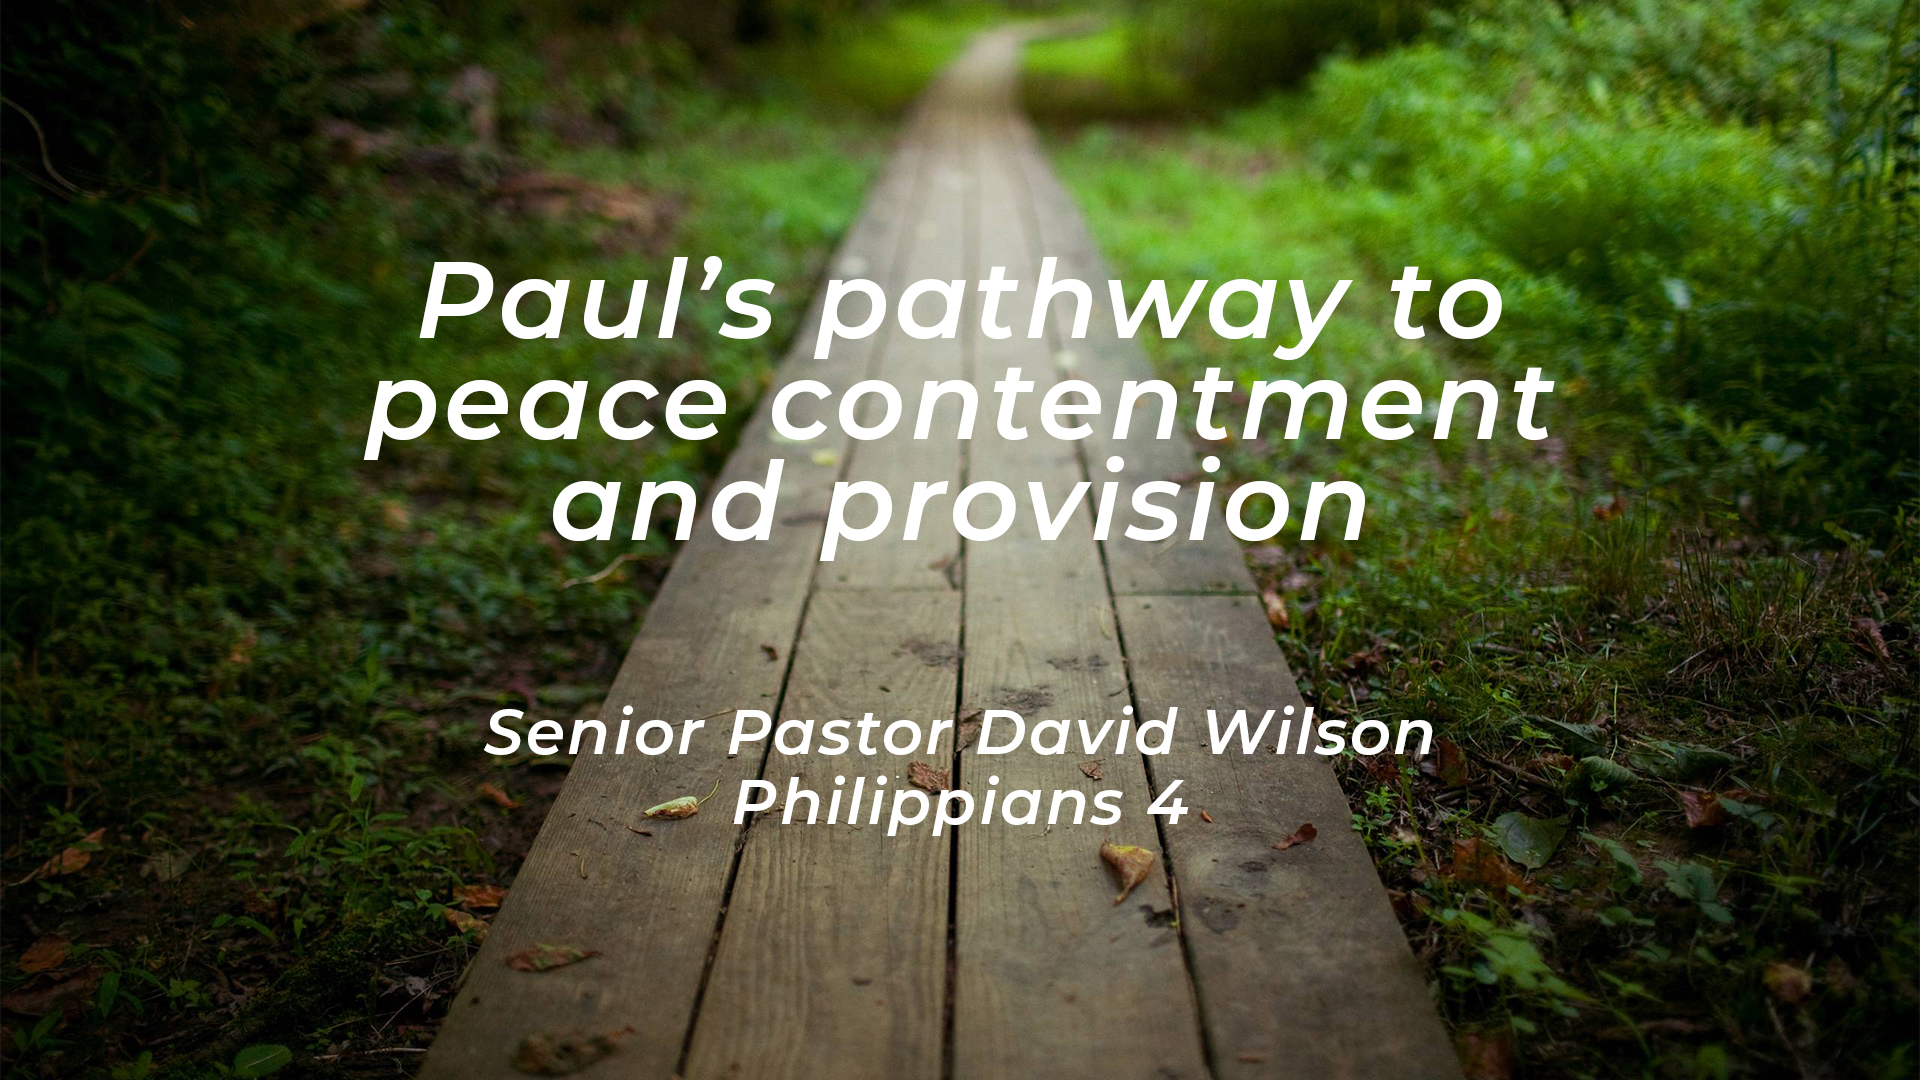 Pauls pathway to peace, contentment and provision